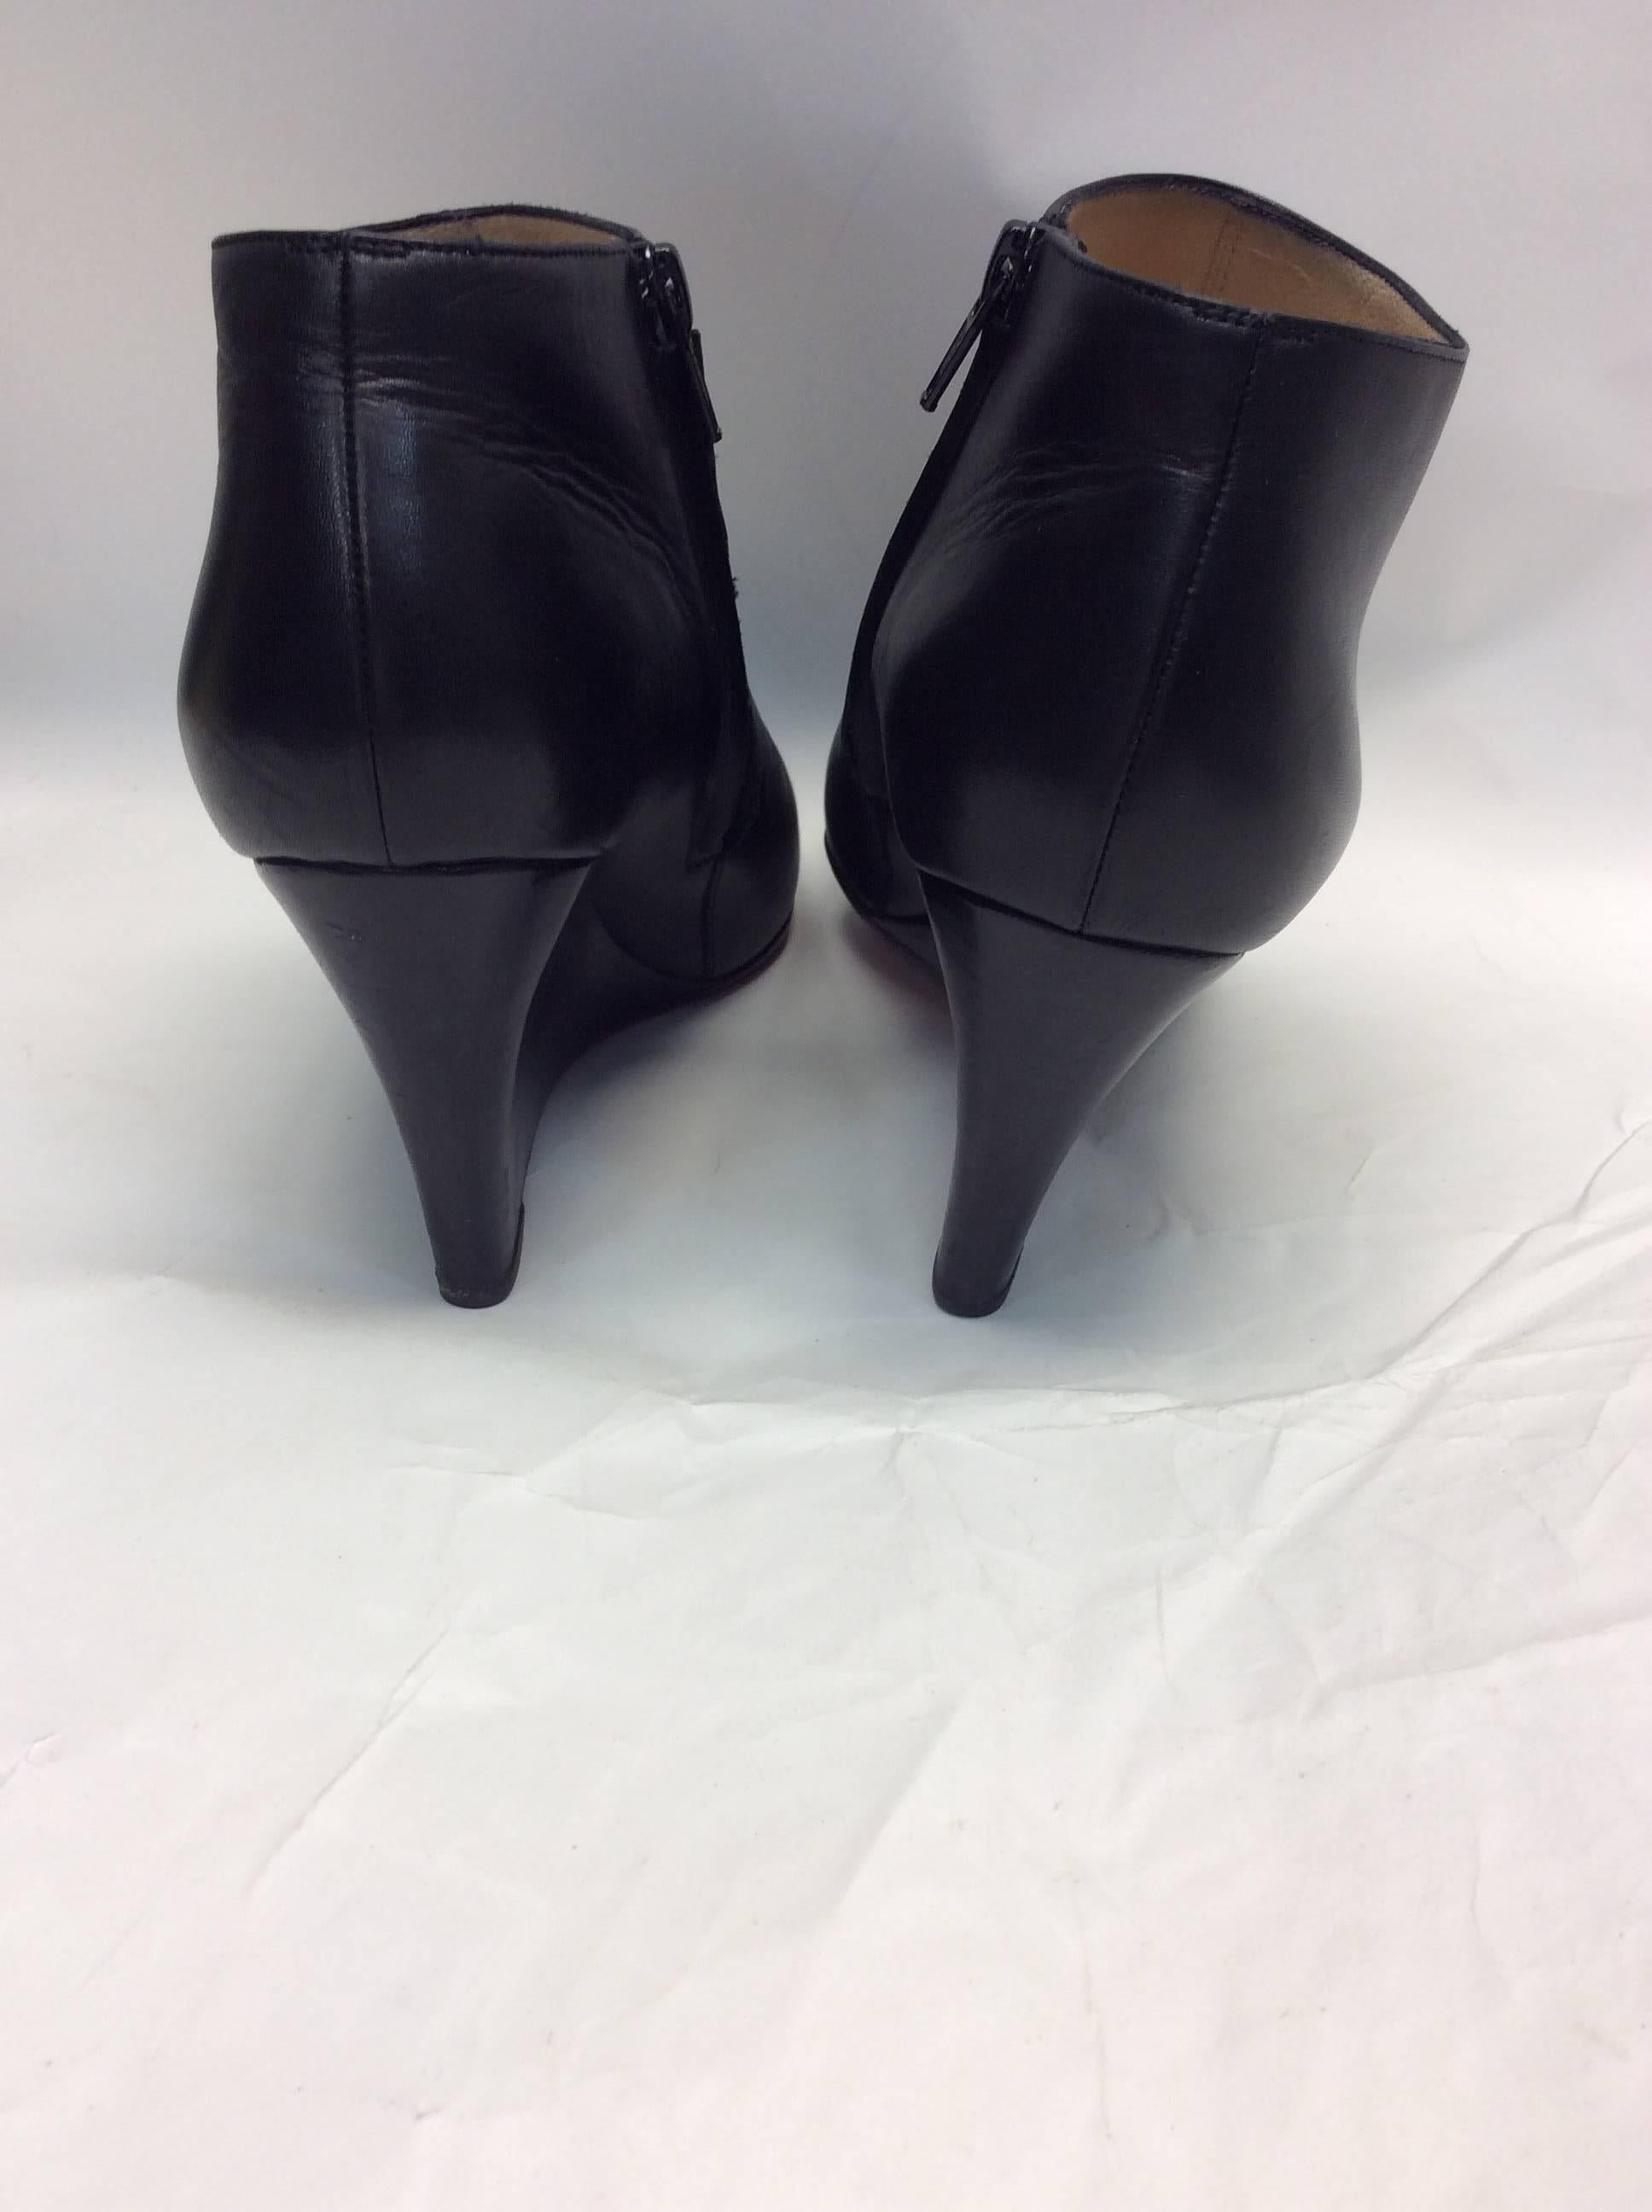 Christian Louboutin Black Leather Wedge Boots In Excellent Condition For Sale In Narberth, PA